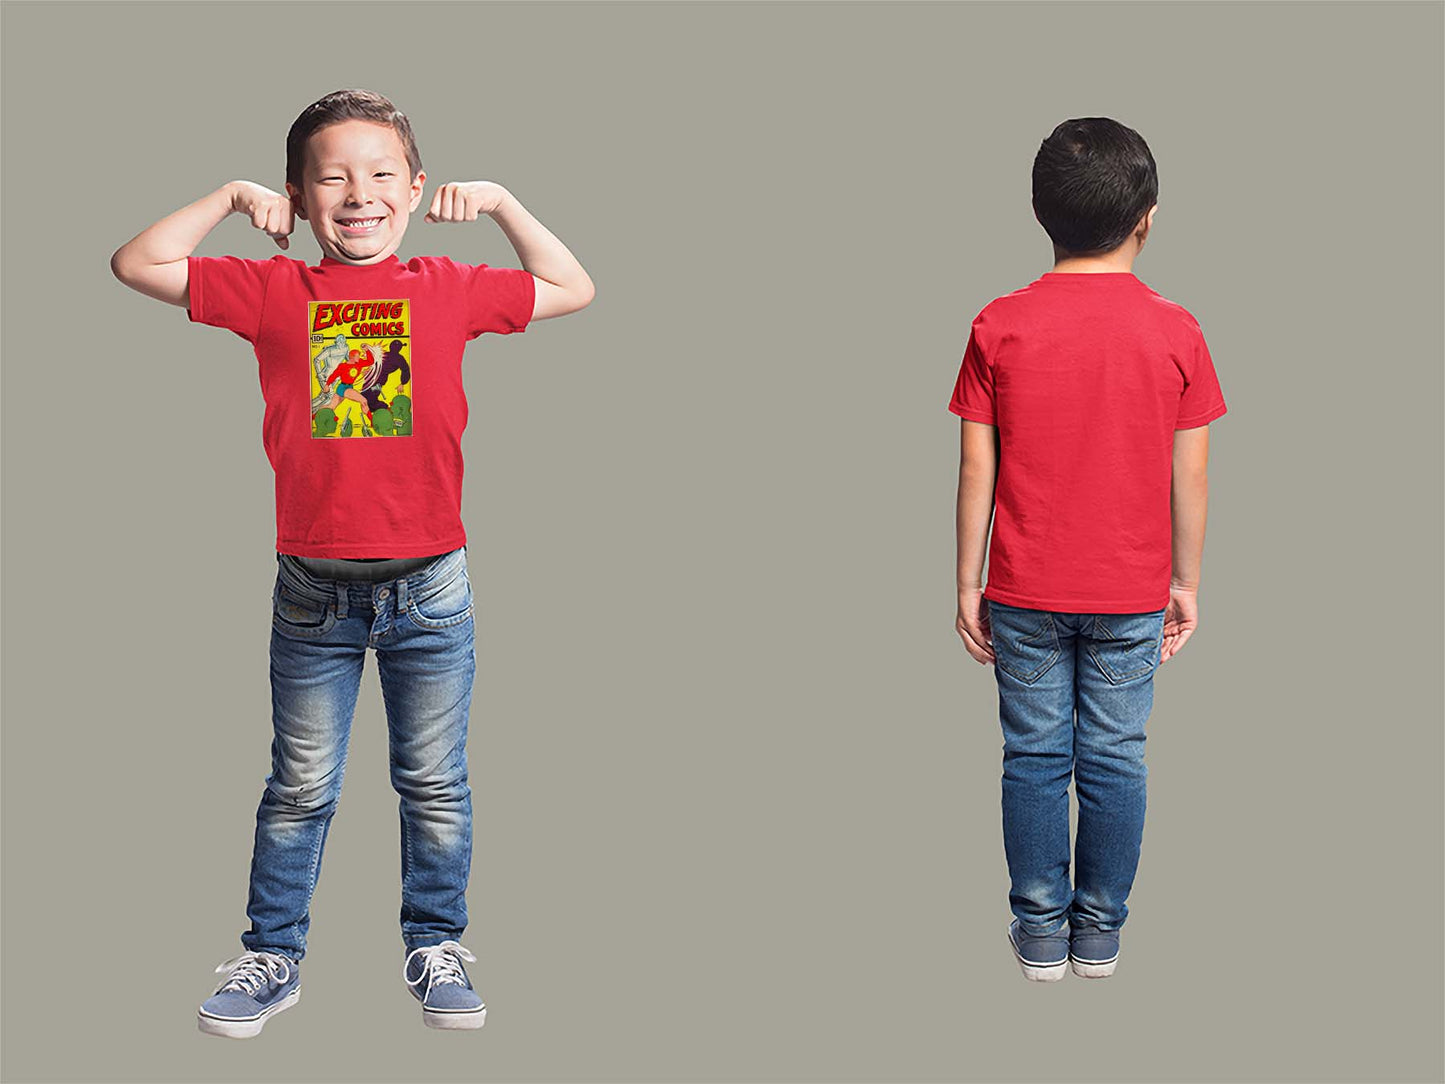 Exciting Comics No.1 Youth T-Shirt Youth Small Red